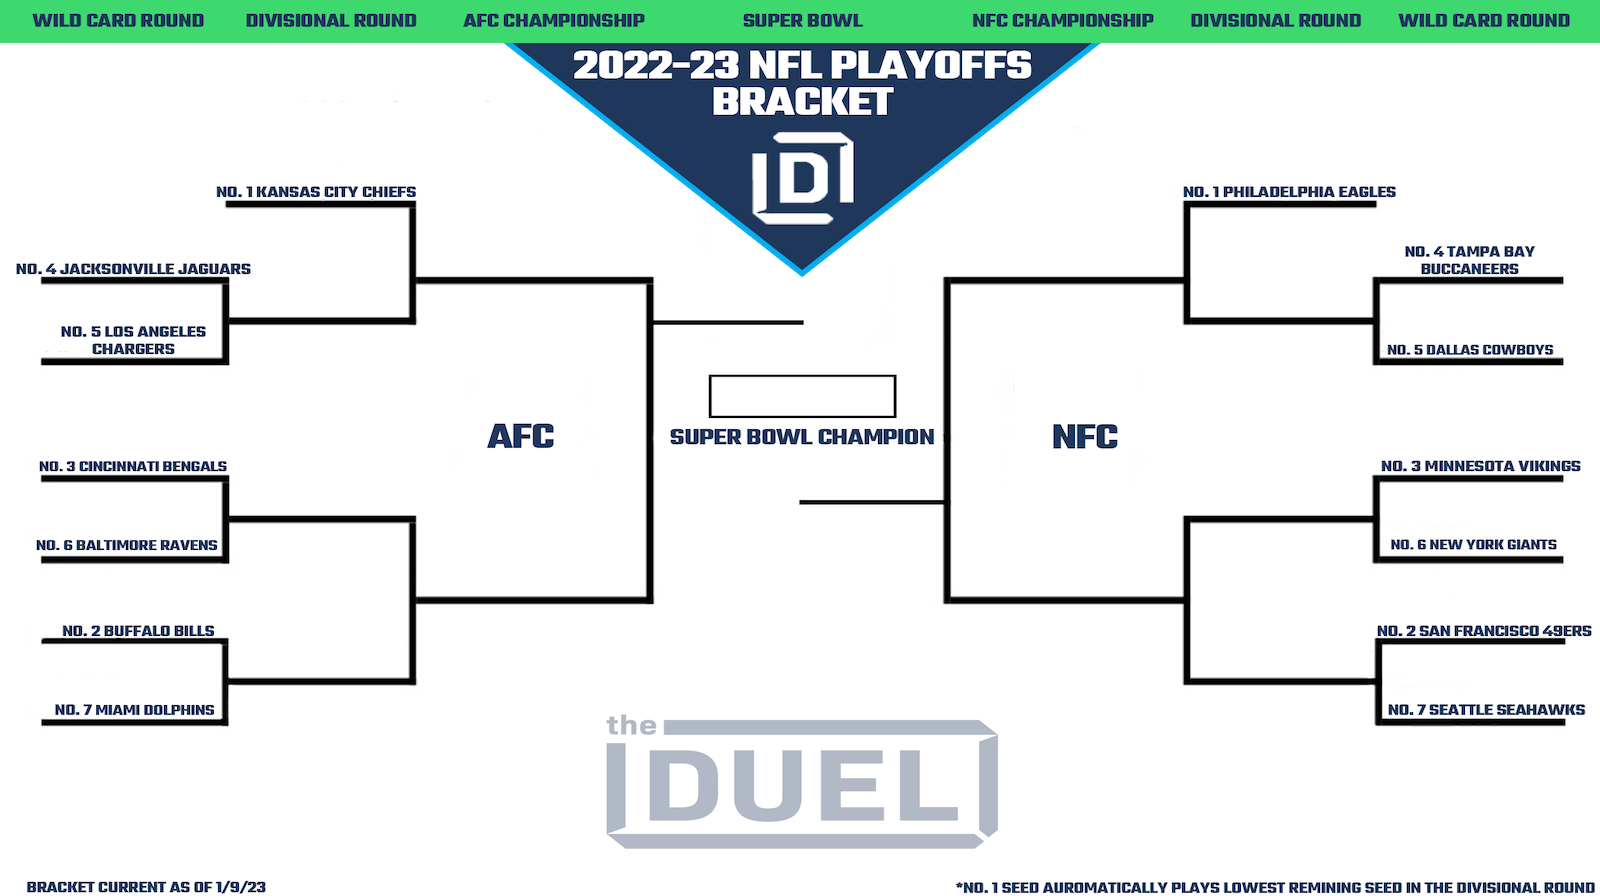 Printable NFL Playoff Bracket 2022-23 for the Wild Card Round